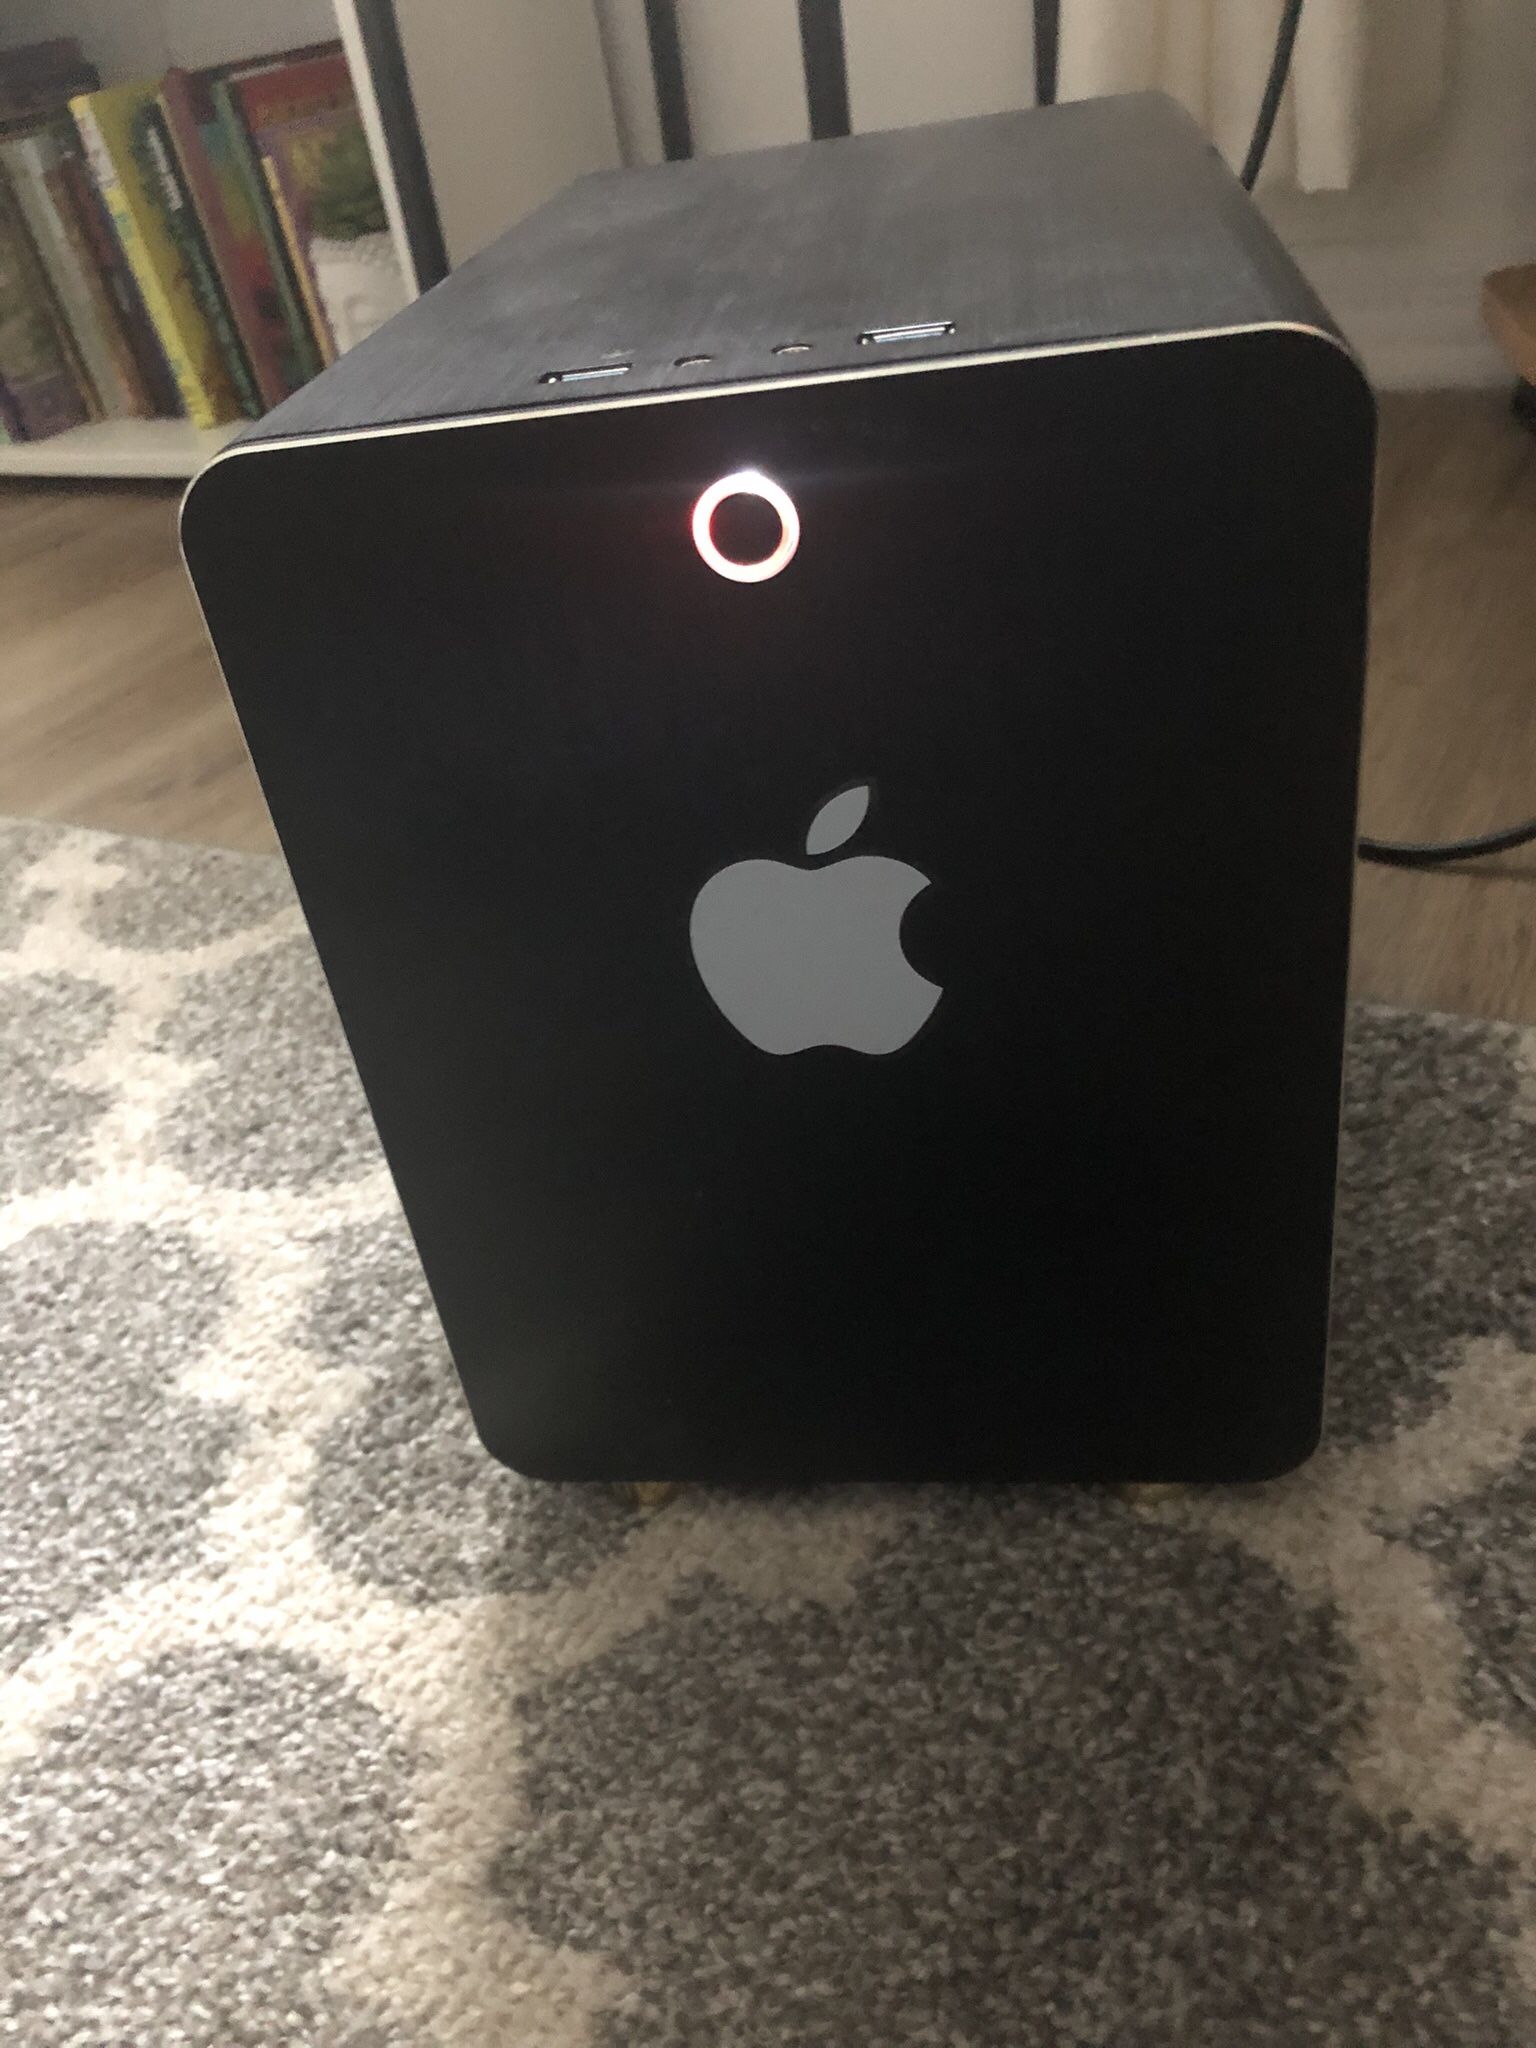 Desktop Computer i5 3.5GHz 16GB Gaming With Apple Sticker